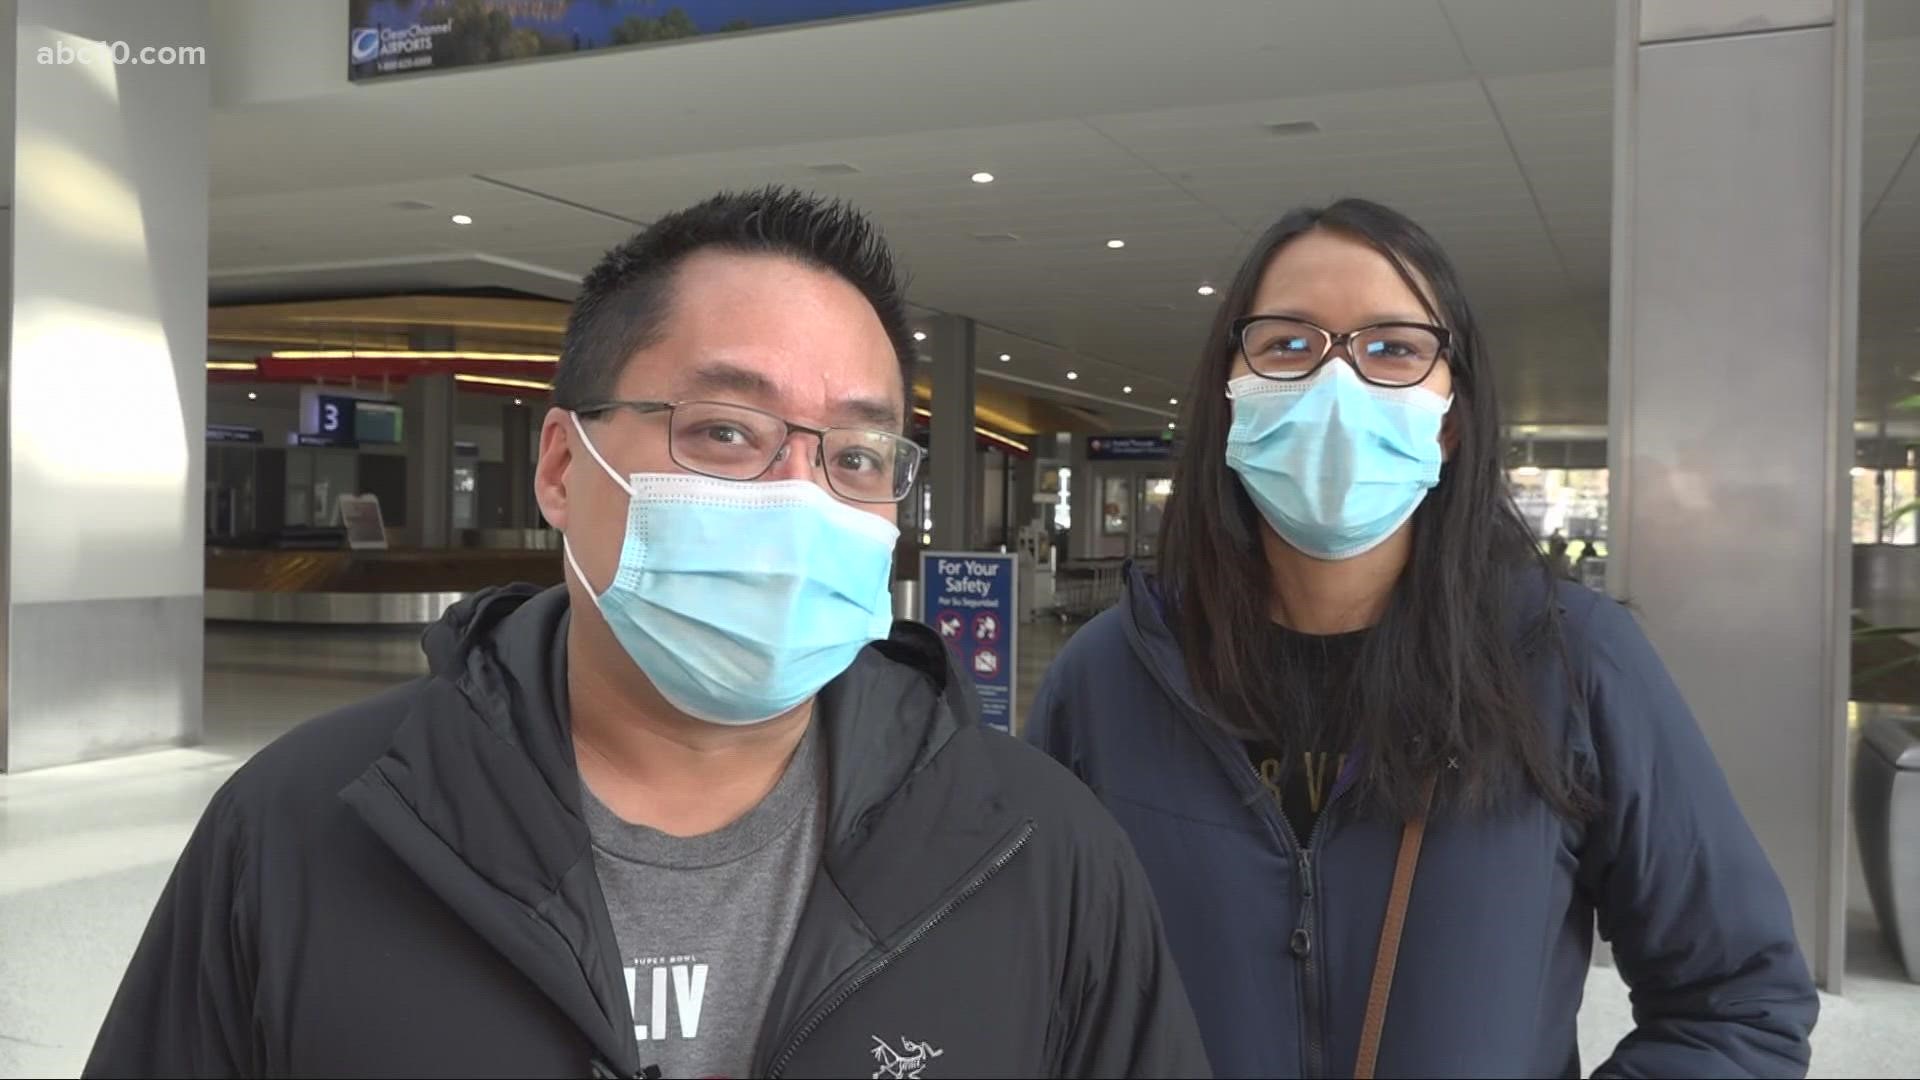 Our Jay Kim stopped by Sacramento International Airport to catch travelers flying in to visit family on Thanksgiving, and ask them how it will compare to 2020.